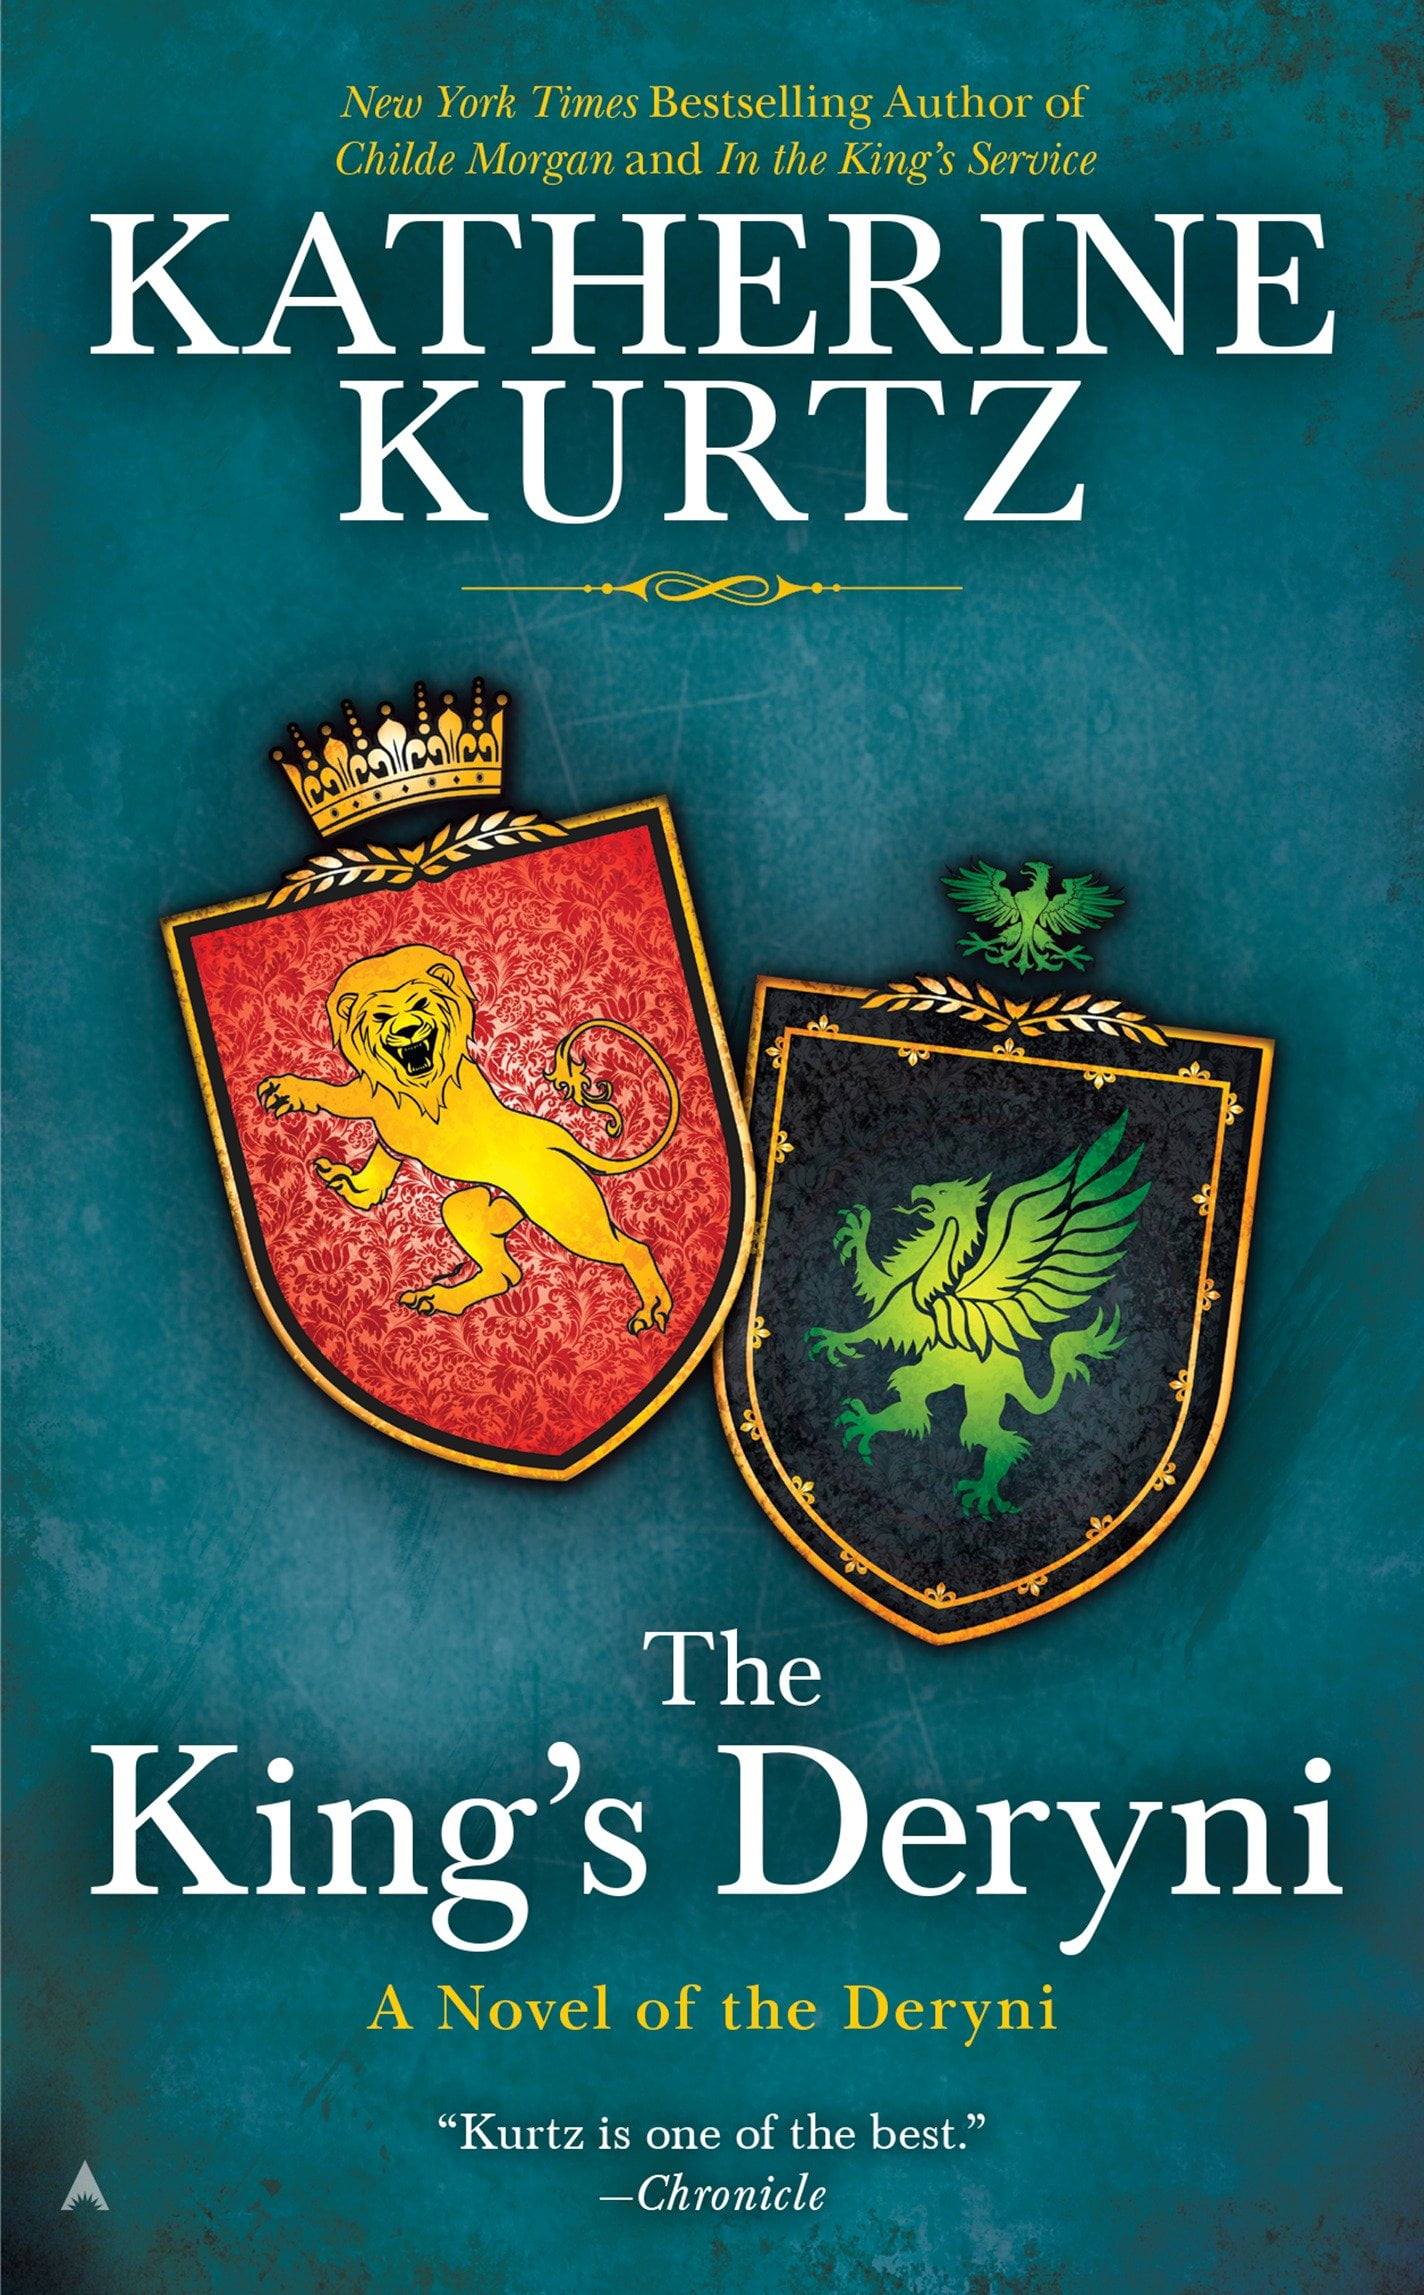 Novel of the Deryni The King's Deryni (Series 03) (Paperback